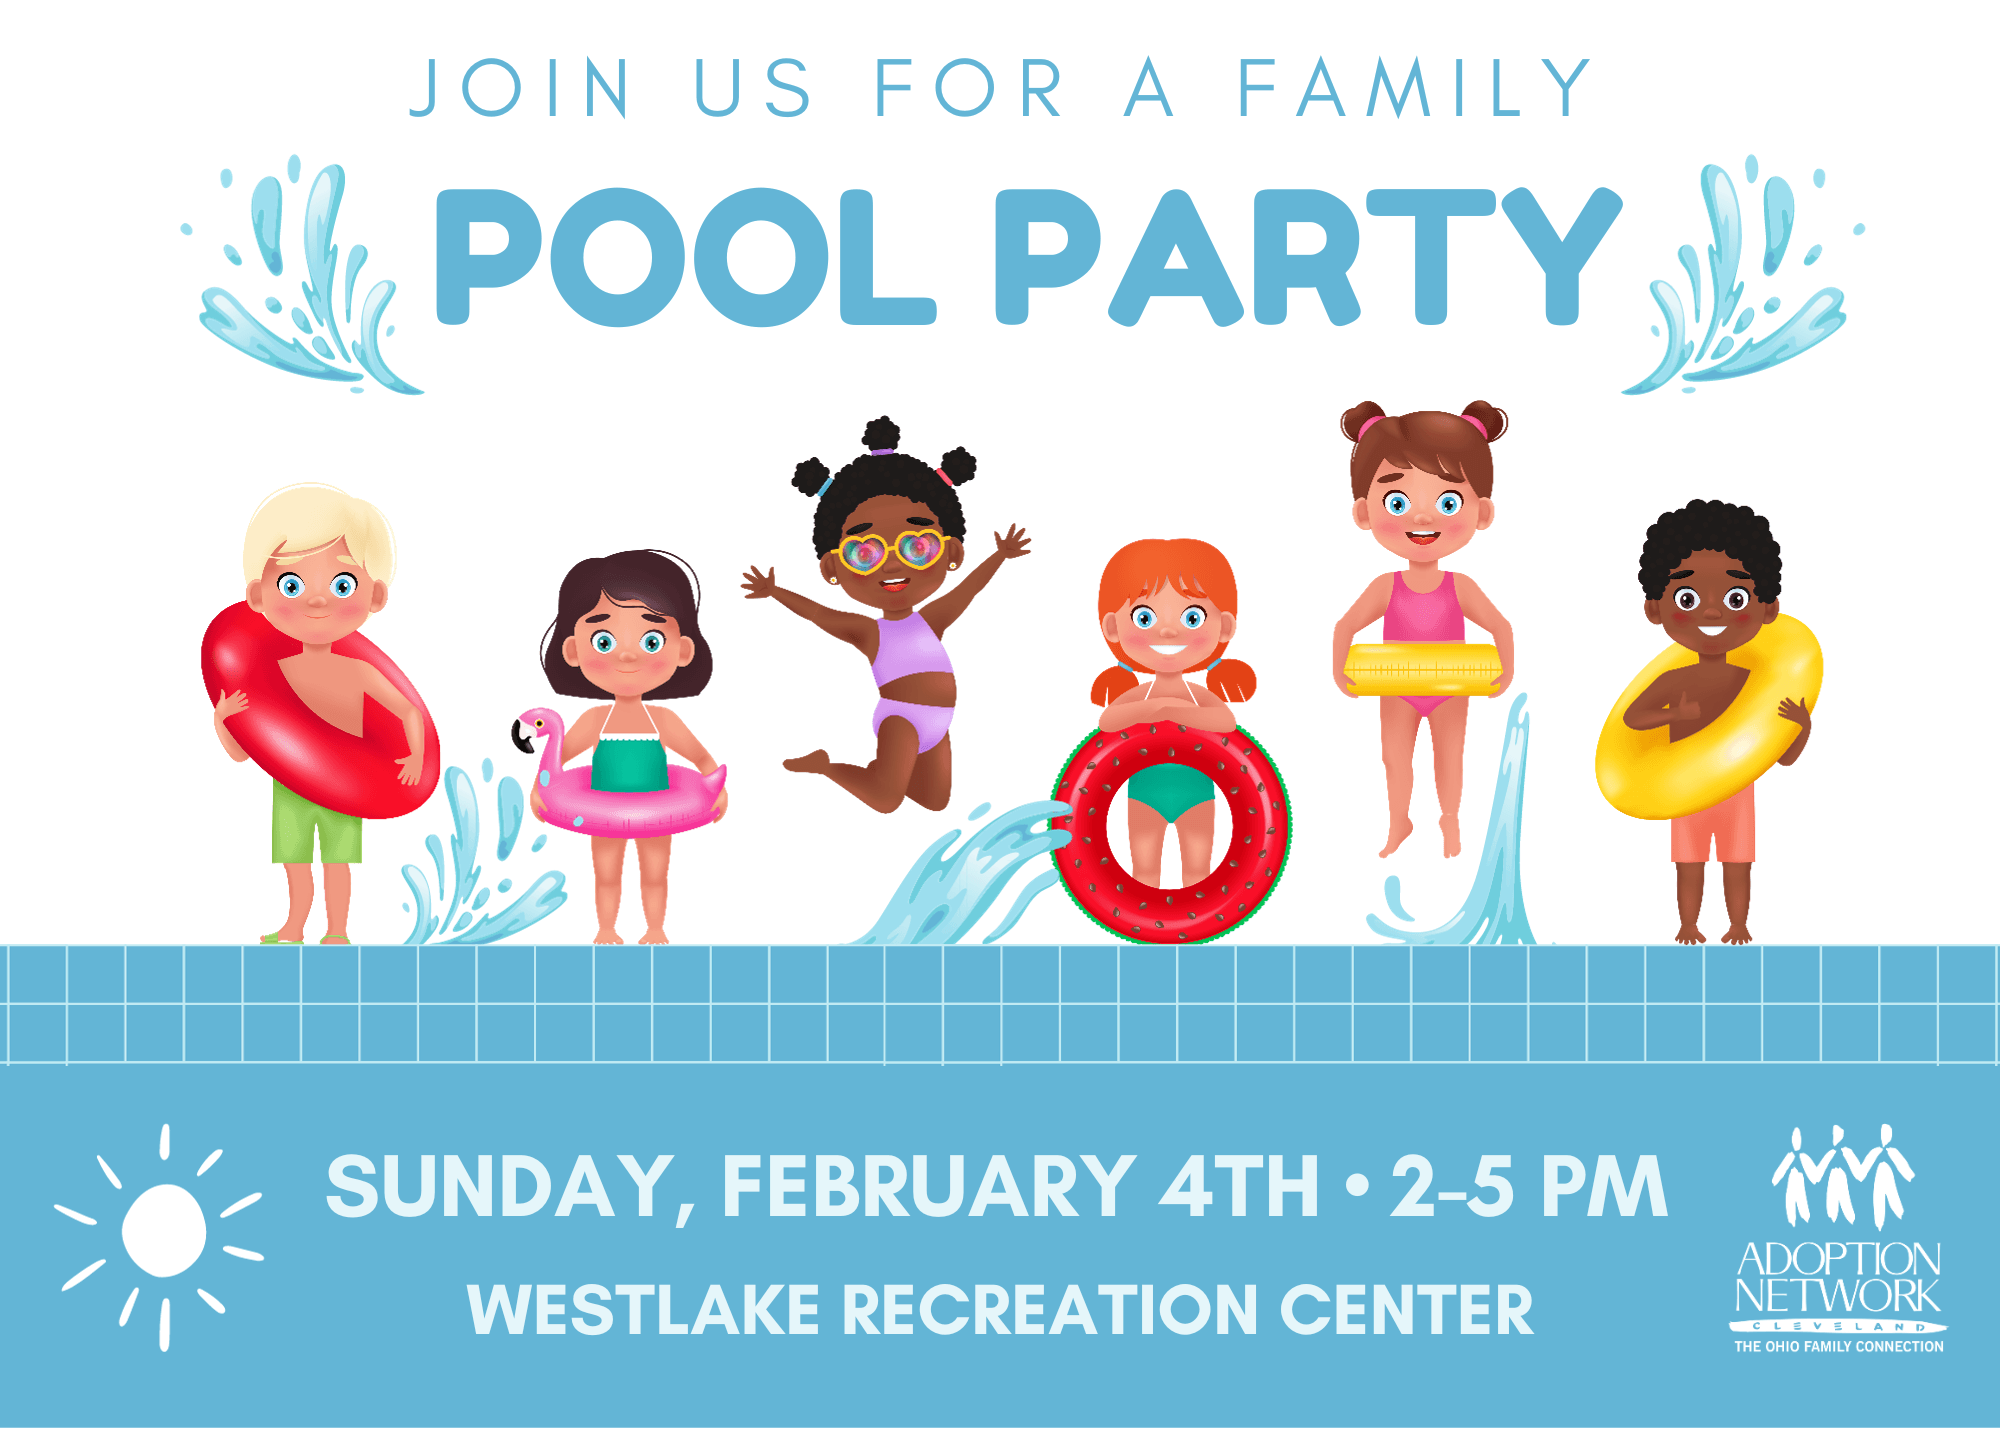 Join us for a Family Pool Party